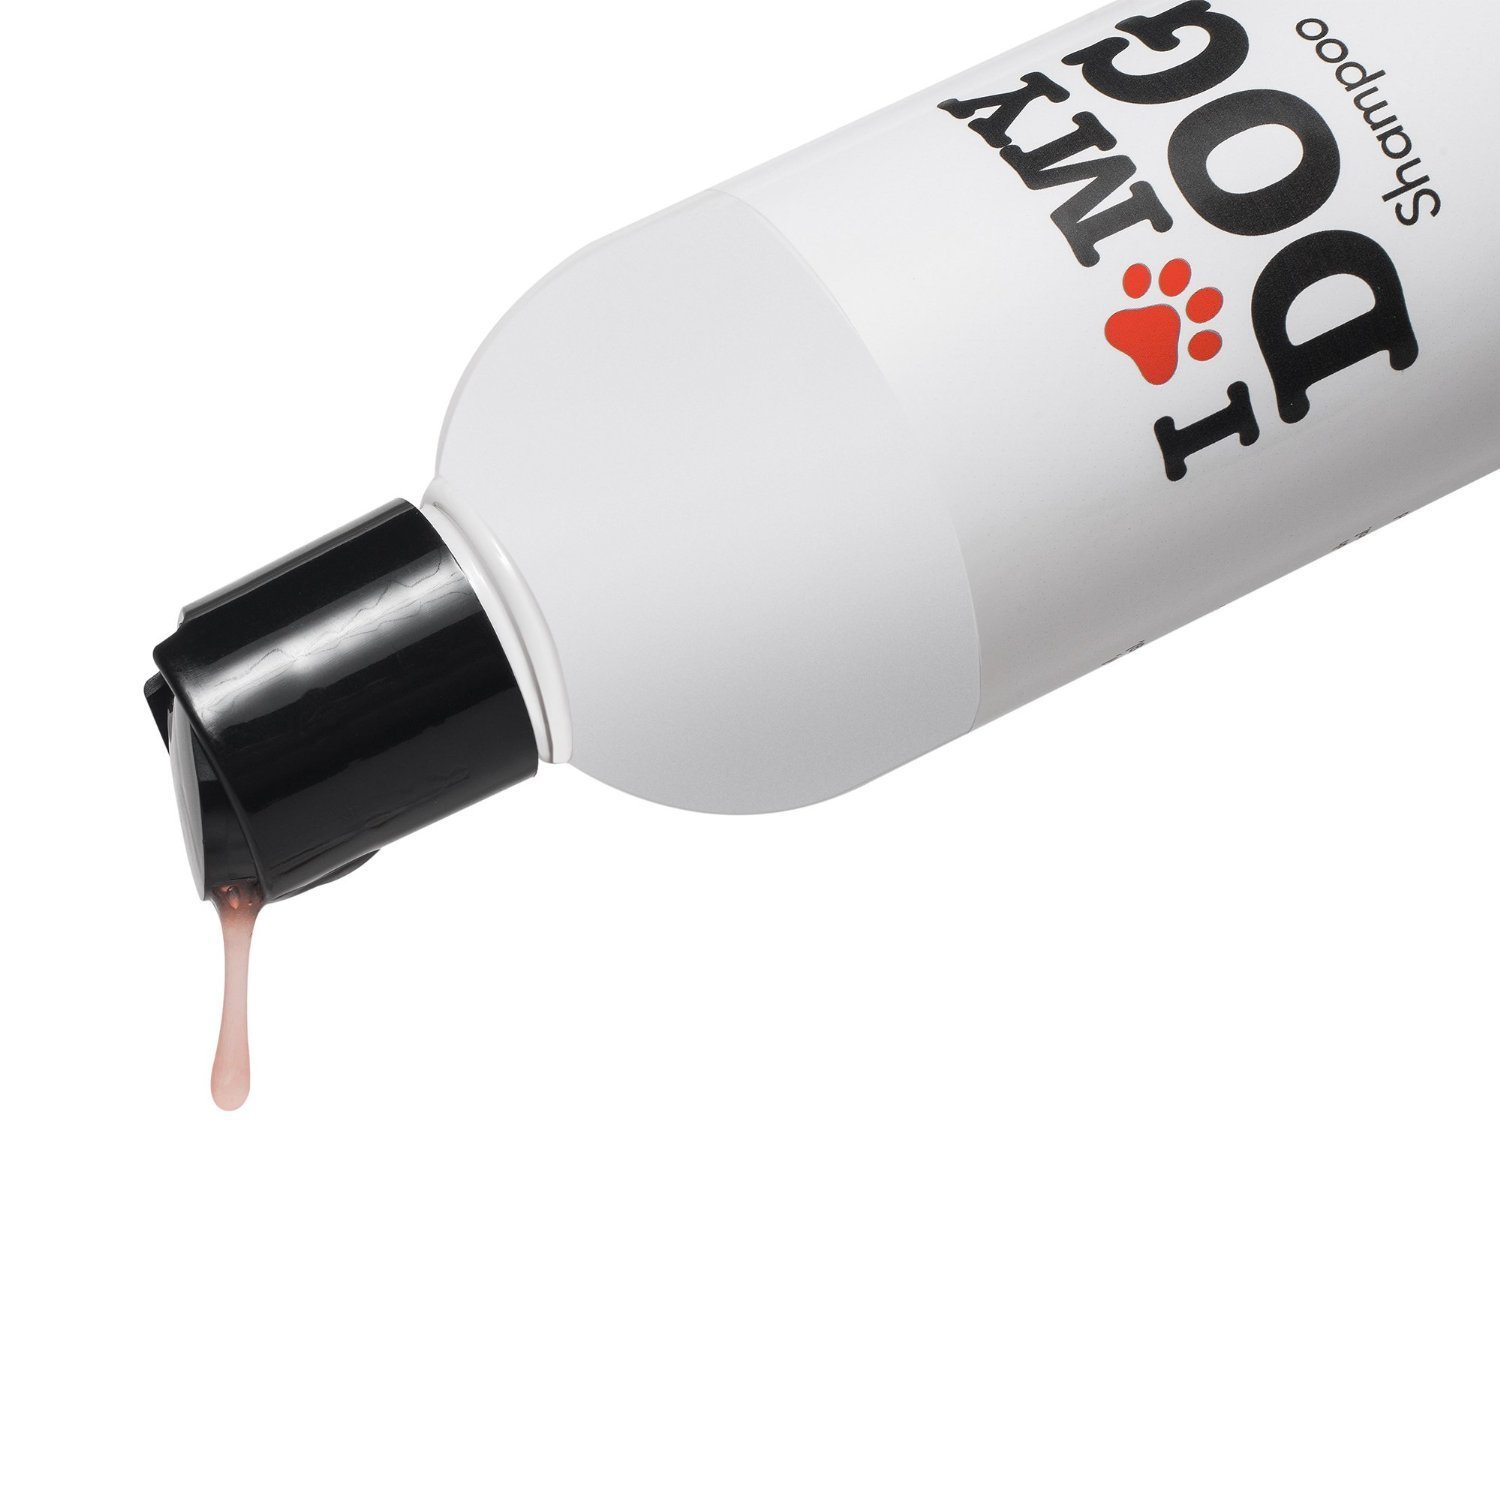 What pet shampoos have the best reviews?